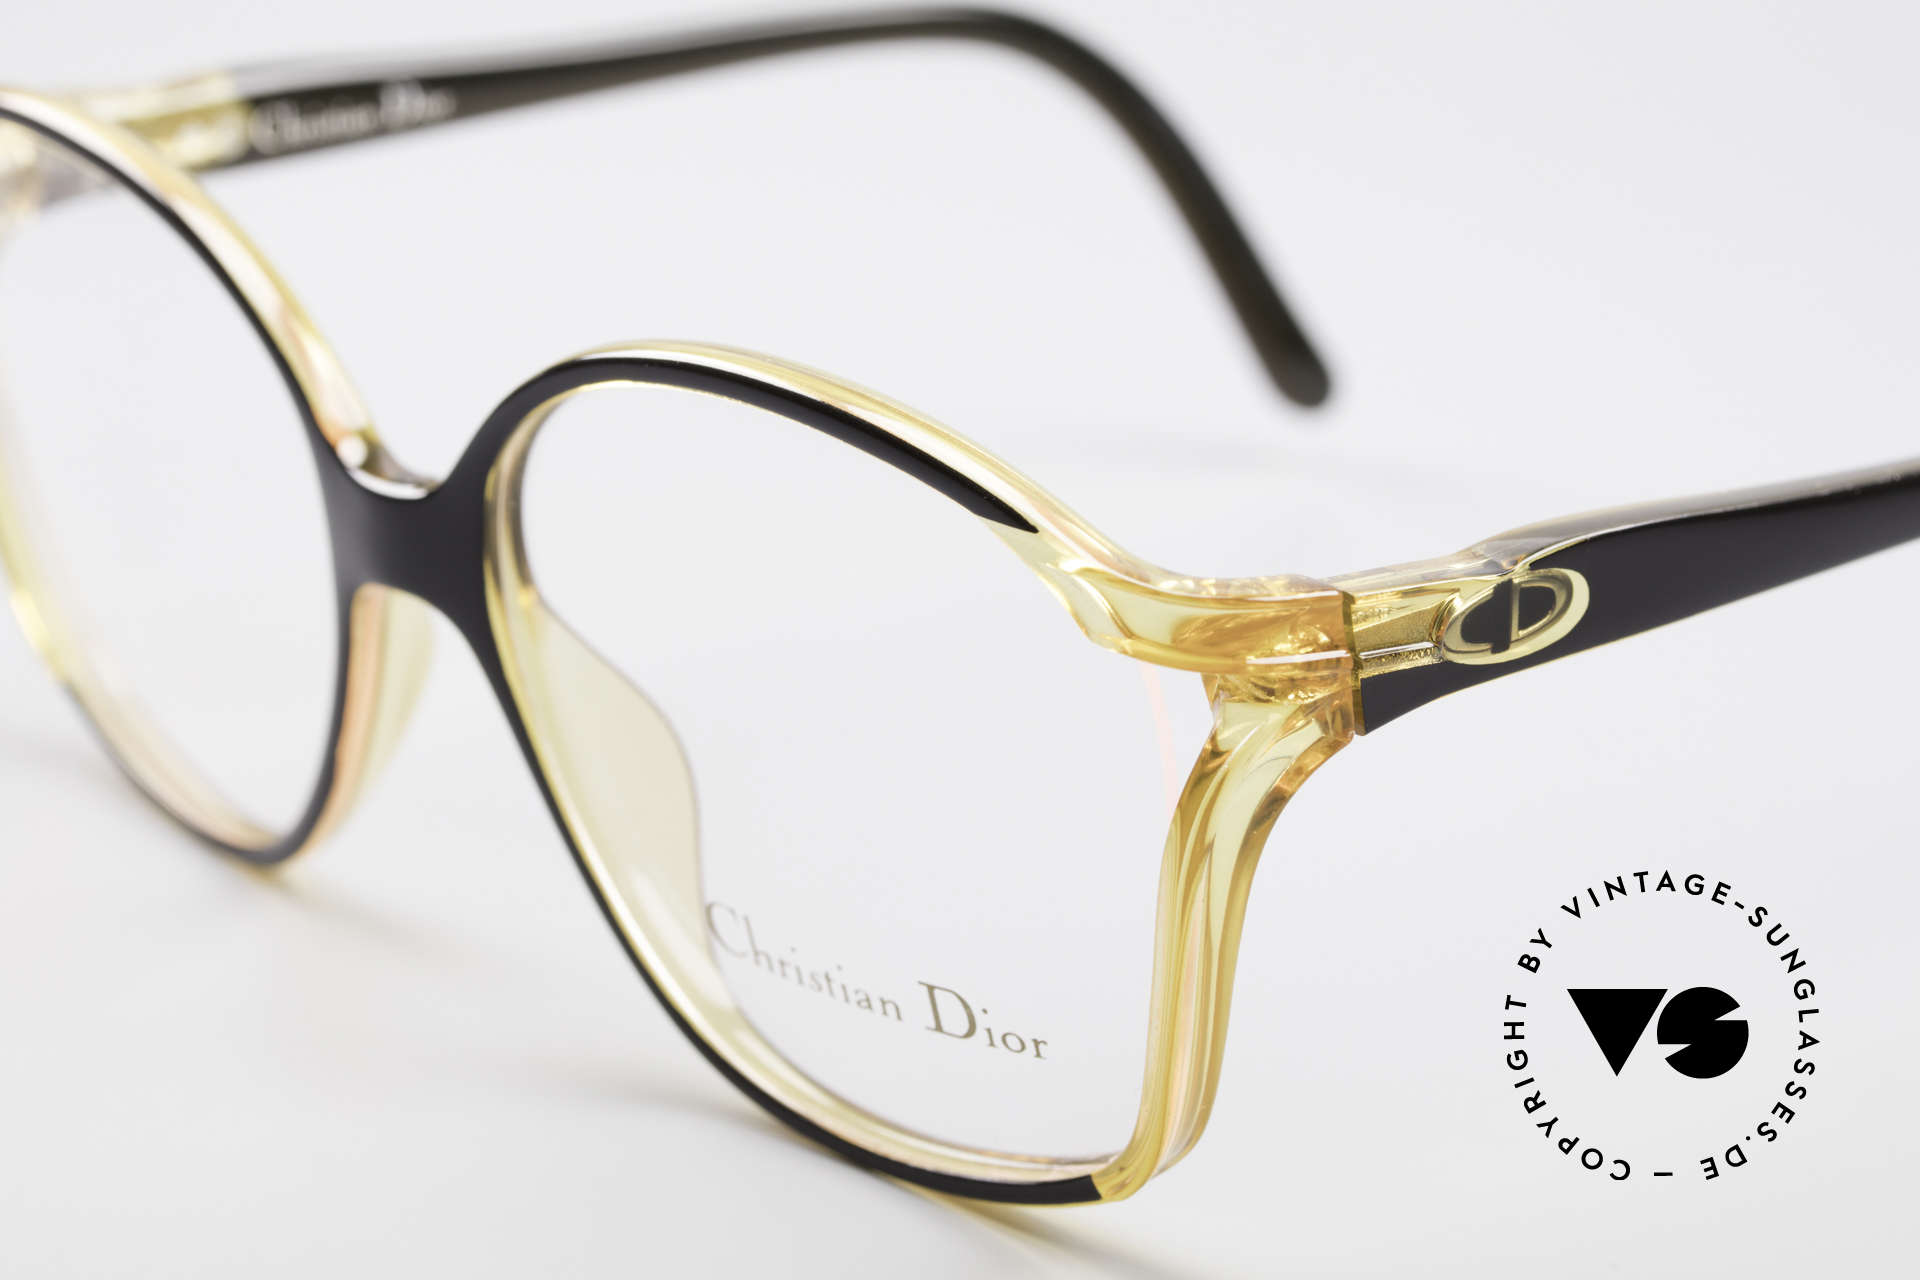 Dior Glasses The Concurrence Of Elegance And Craftsmanship Telegraph 